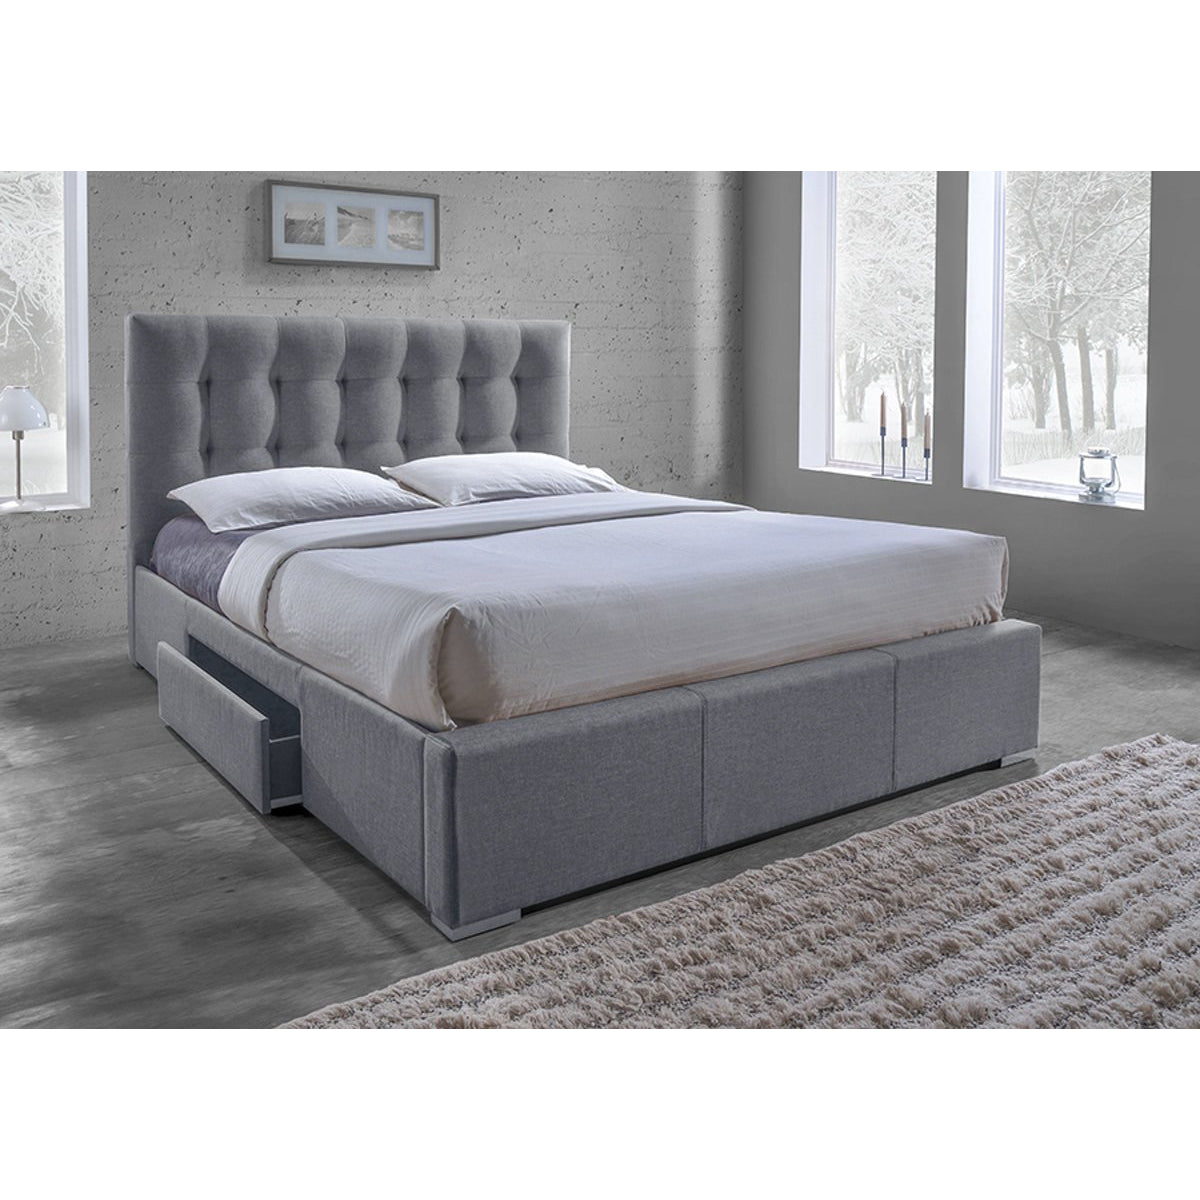 Baxton Studio Sarter Contemporary Grid-Tufted Grey Fabric Upholstered Storage King-Size Bed with 2-drawer Baxton Studio-beds-Minimal And Modern - 5